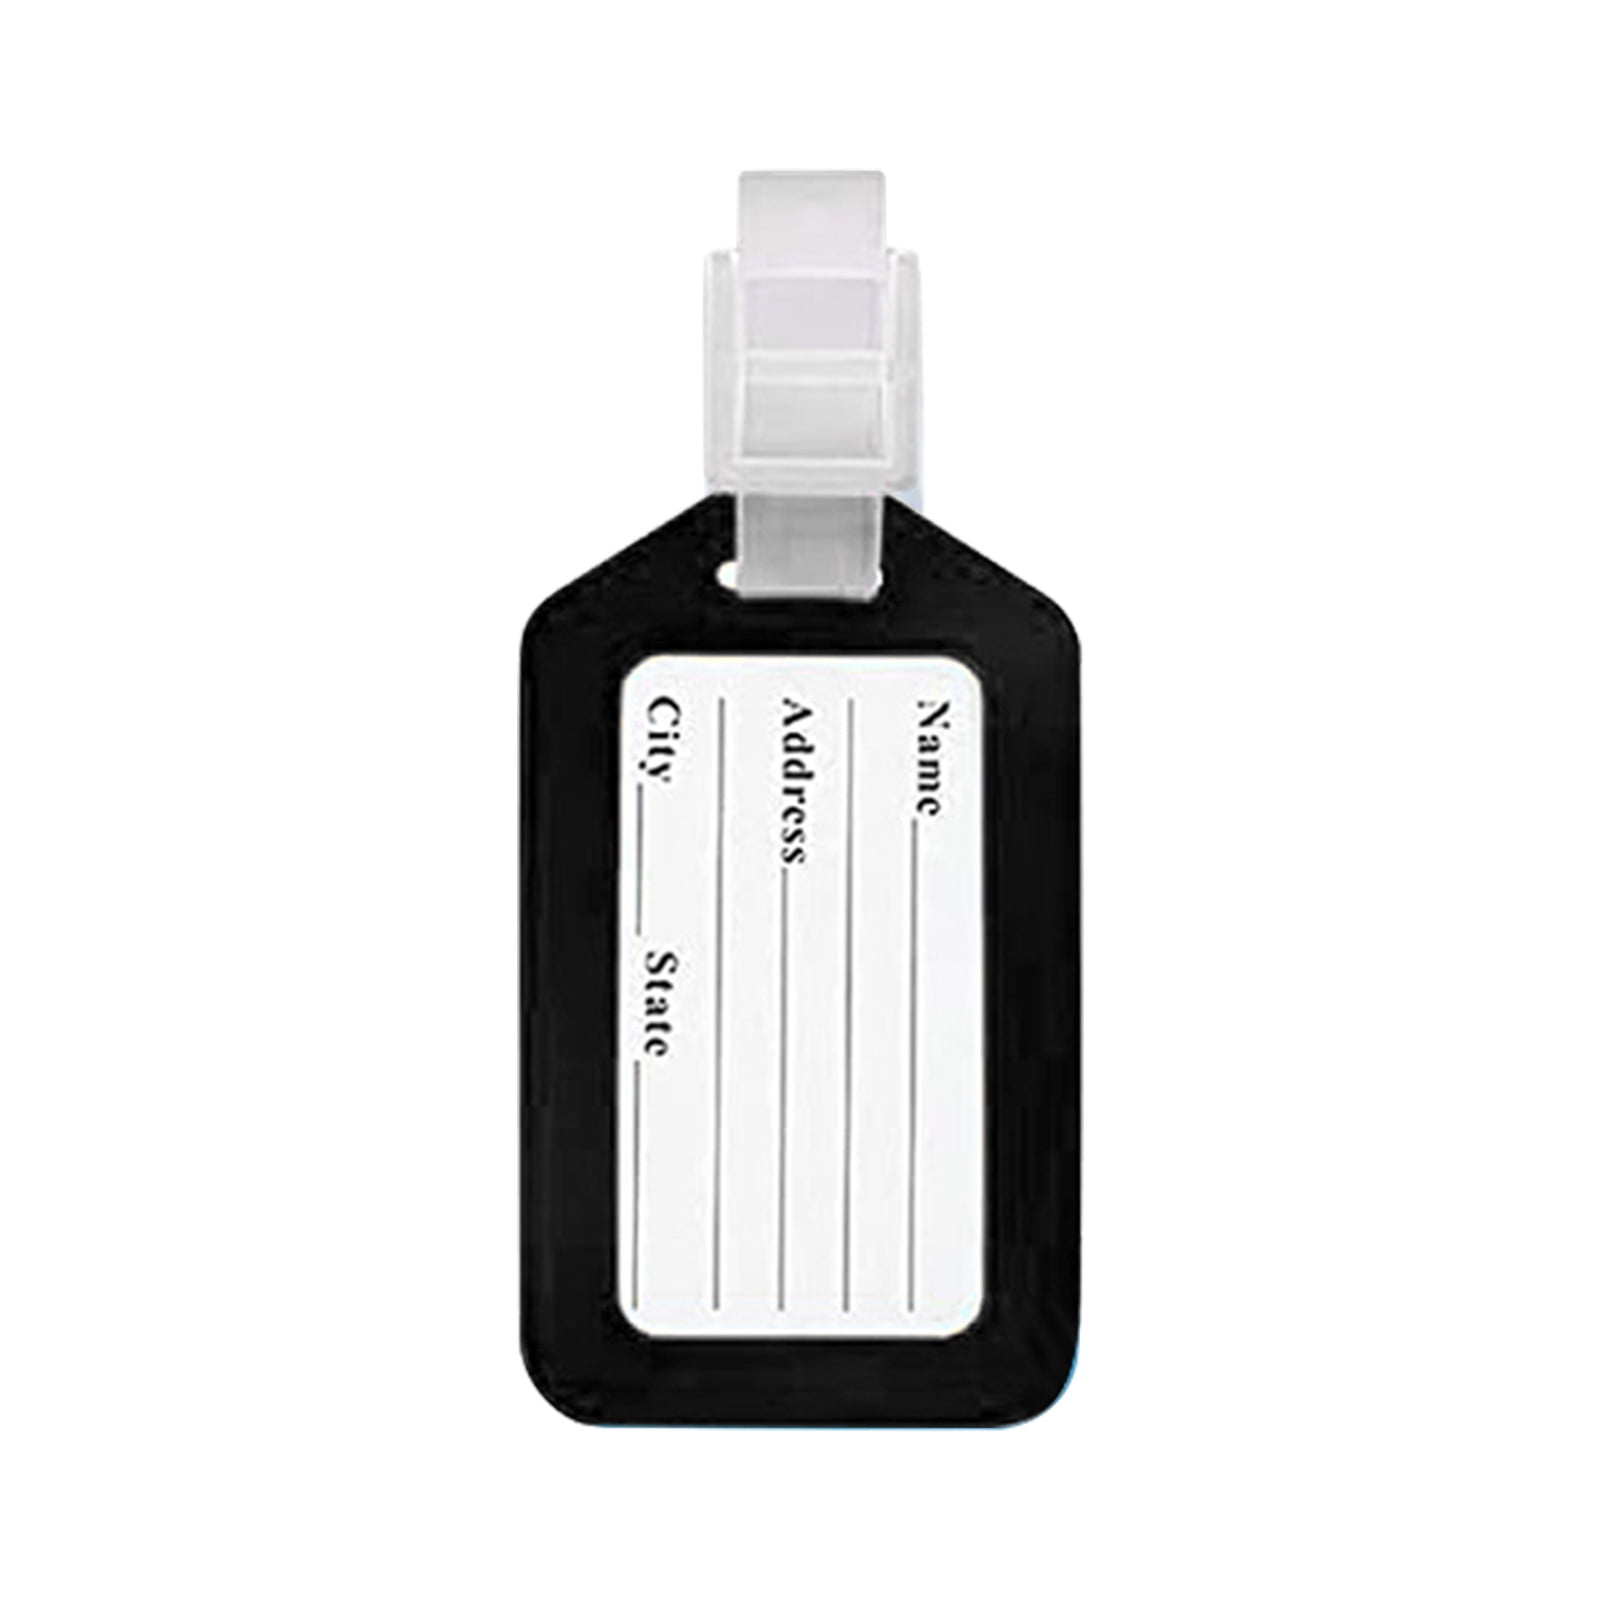 Outdoor 1 Pcs Luggage Tags 3.4x1.9 Inches Luggage Identifiers With Lanyard Name Tags Accessories ID Tags Multi Color Airplane Suitcase - Walmart.com